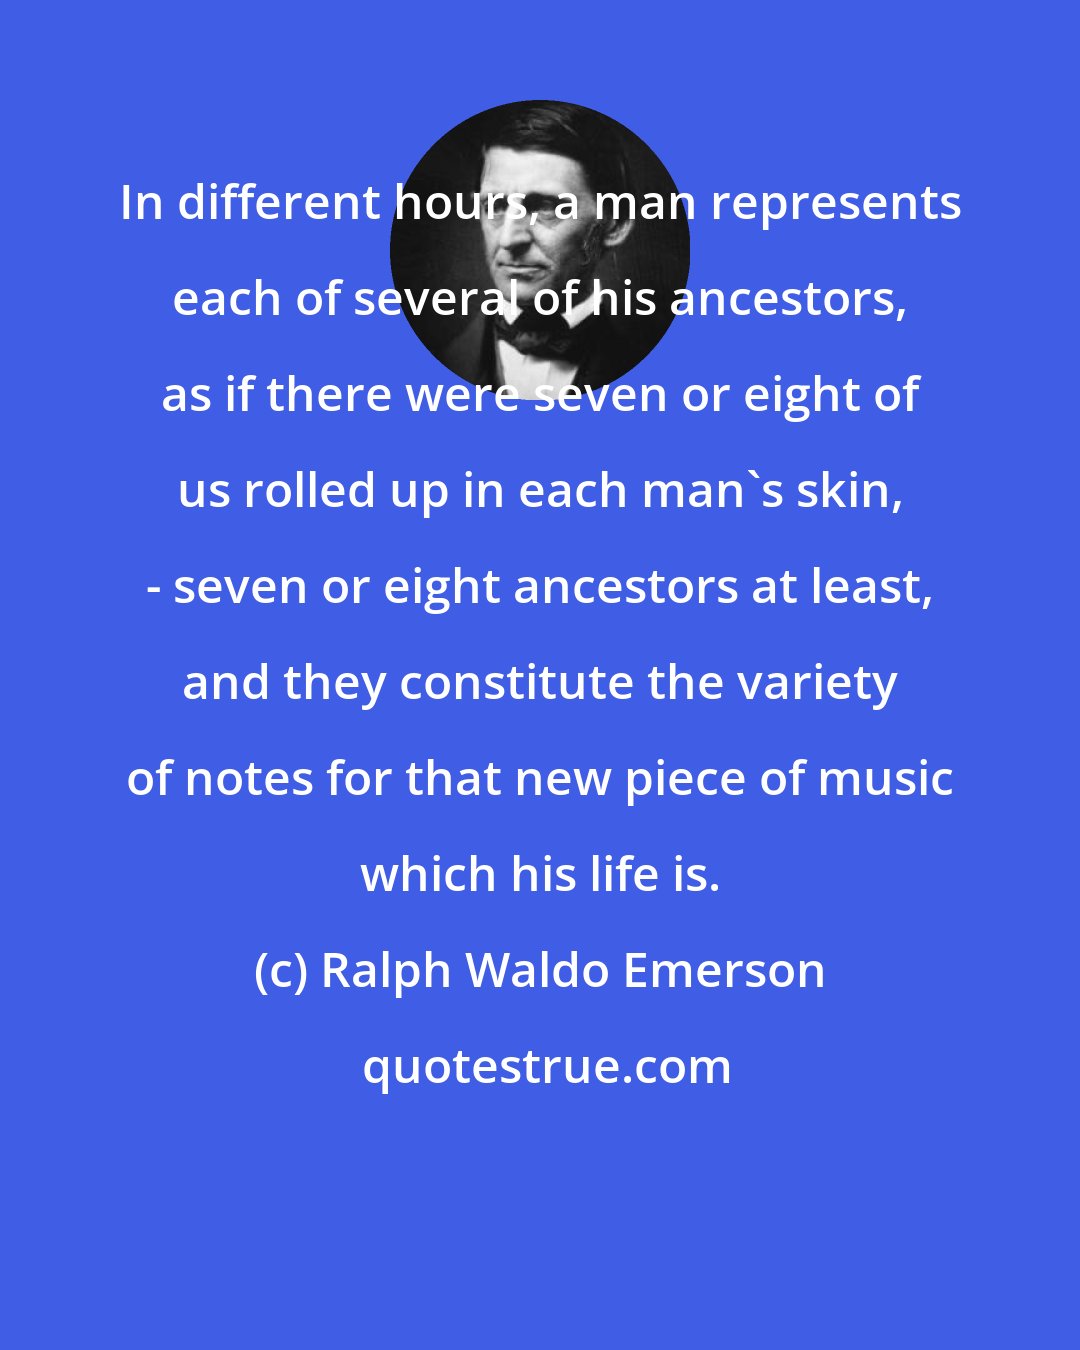 Ralph Waldo Emerson: In different hours, a man represents each of several of his ancestors, as if there were seven or eight of us rolled up in each man's skin, - seven or eight ancestors at least, and they constitute the variety of notes for that new piece of music which his life is.